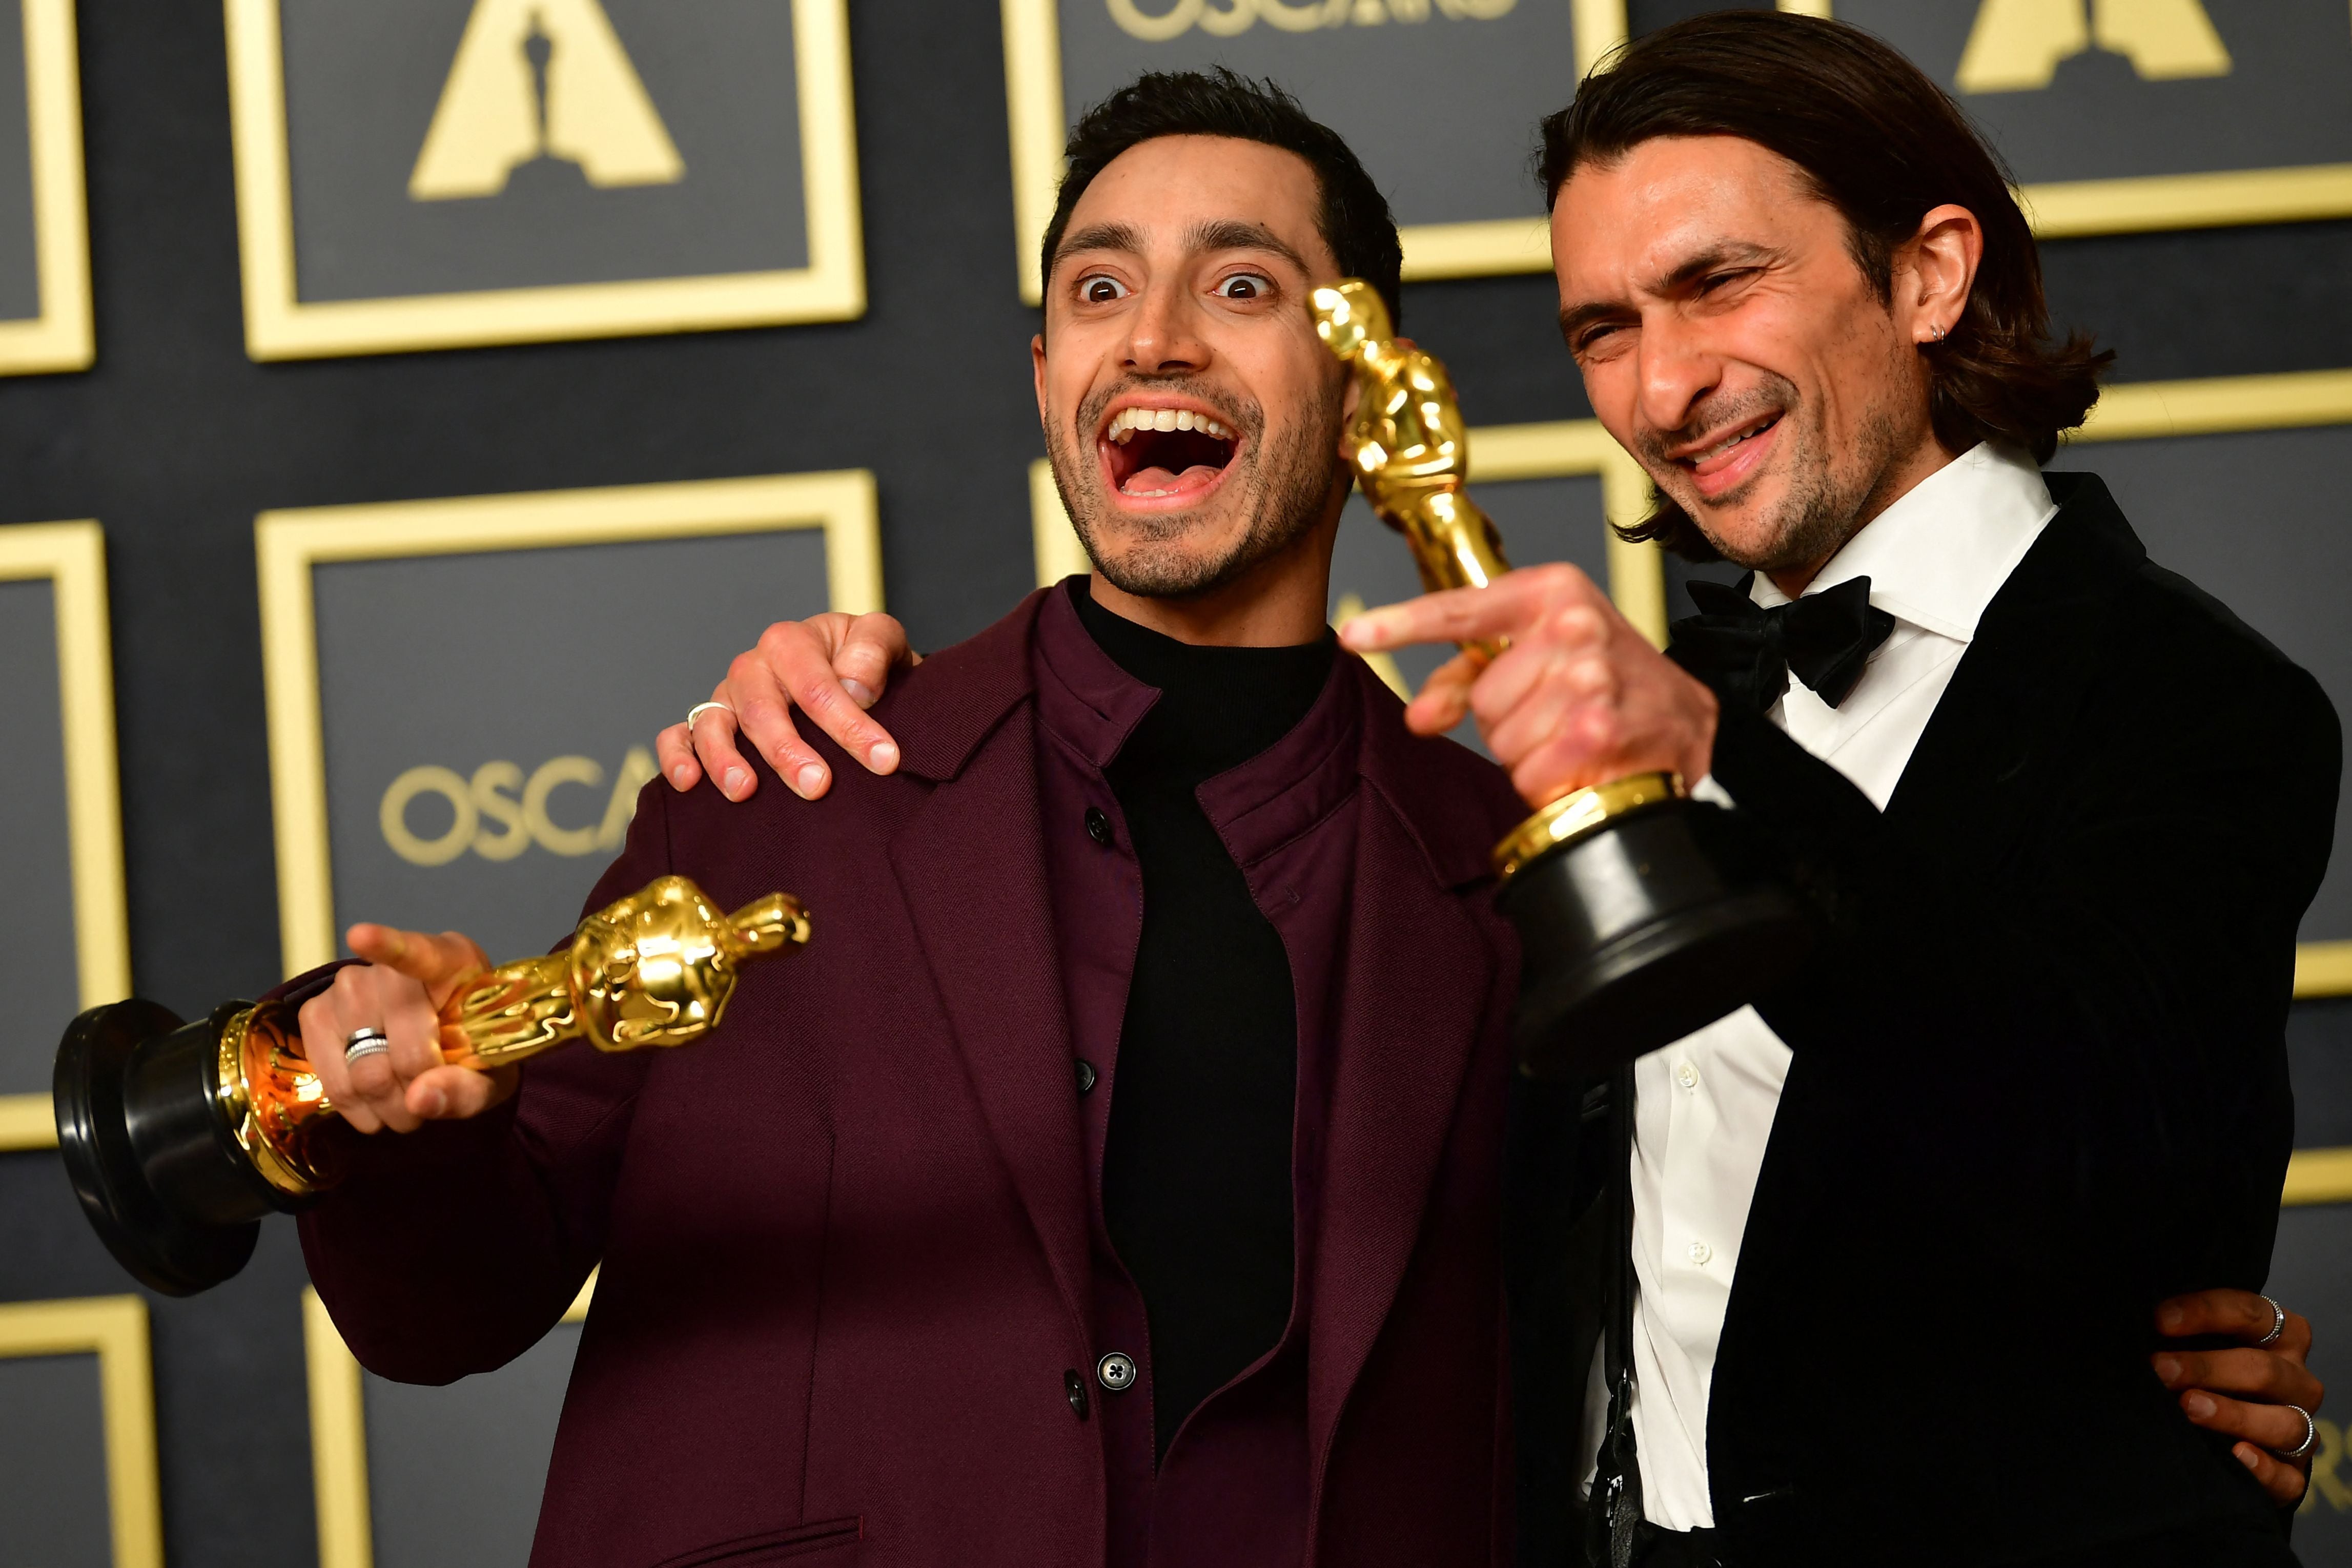 Best live action short film winners for ‘The Long Goodbye’ and Riz Ahmed and Aneil Karia